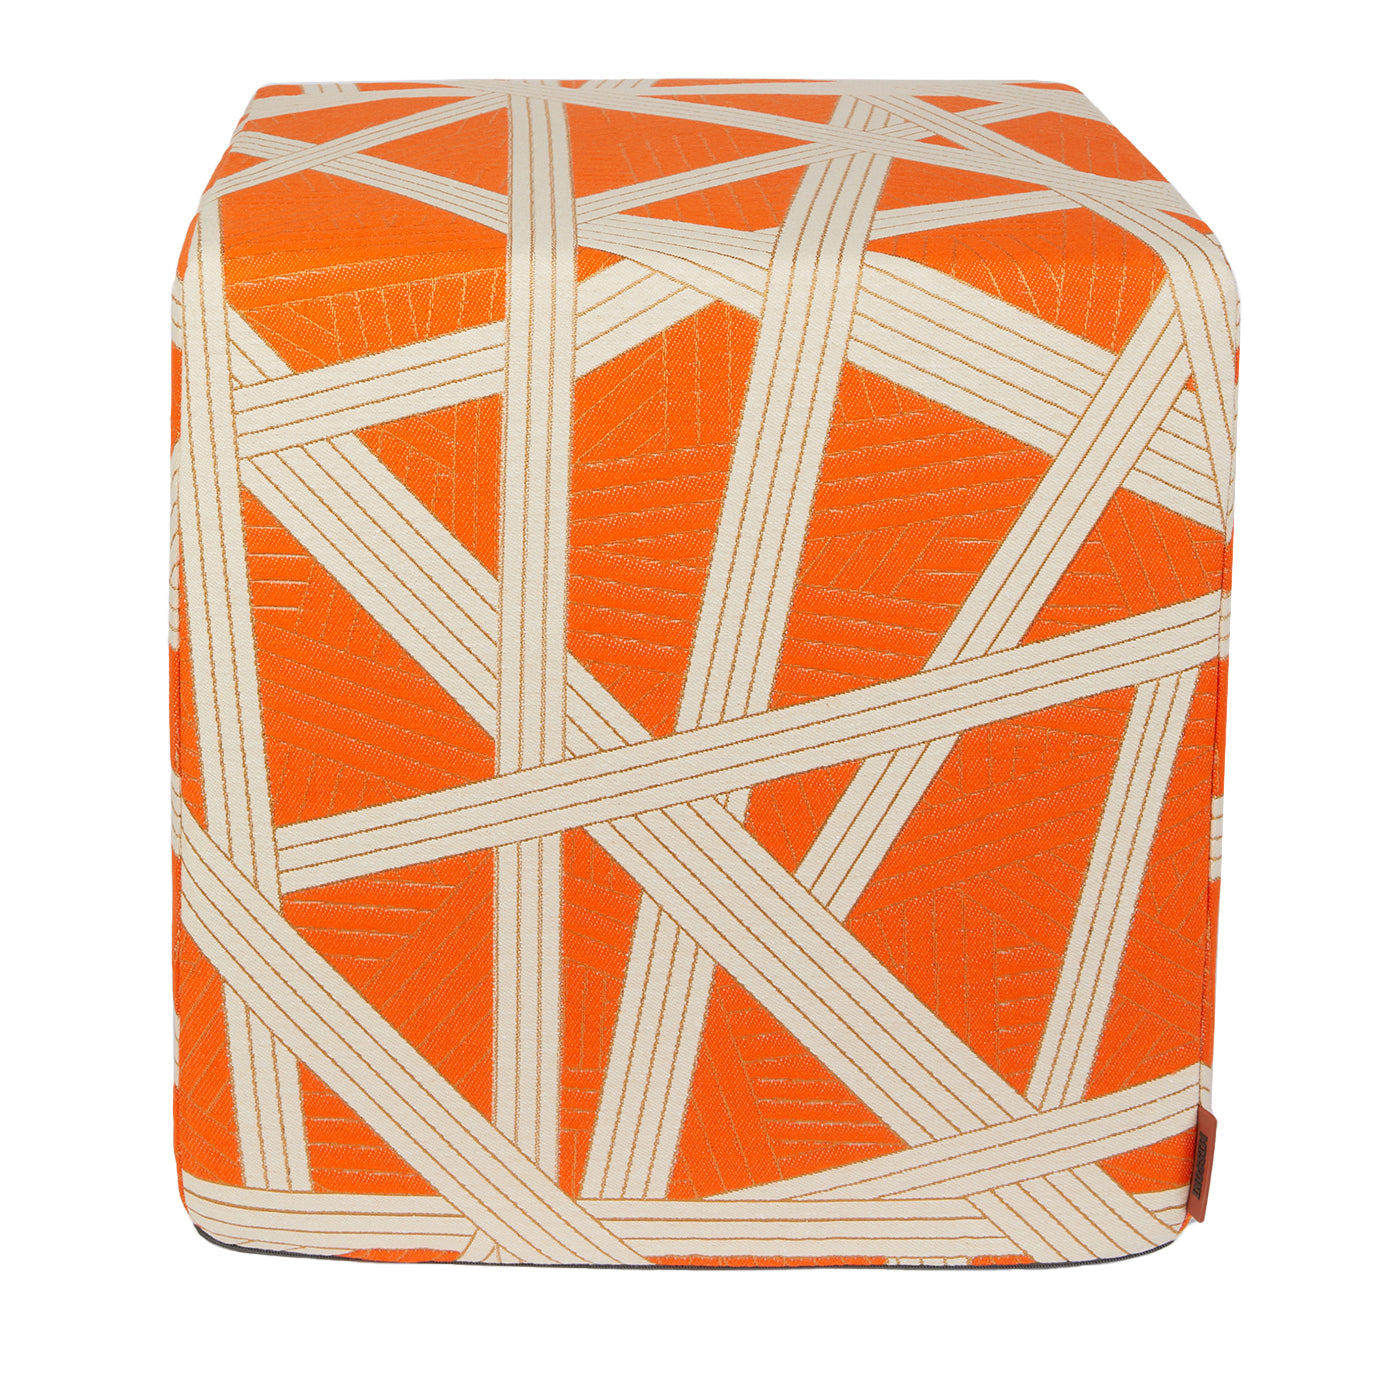 Nastri Cubic Gold and Orange Stitching Pouf - Main view